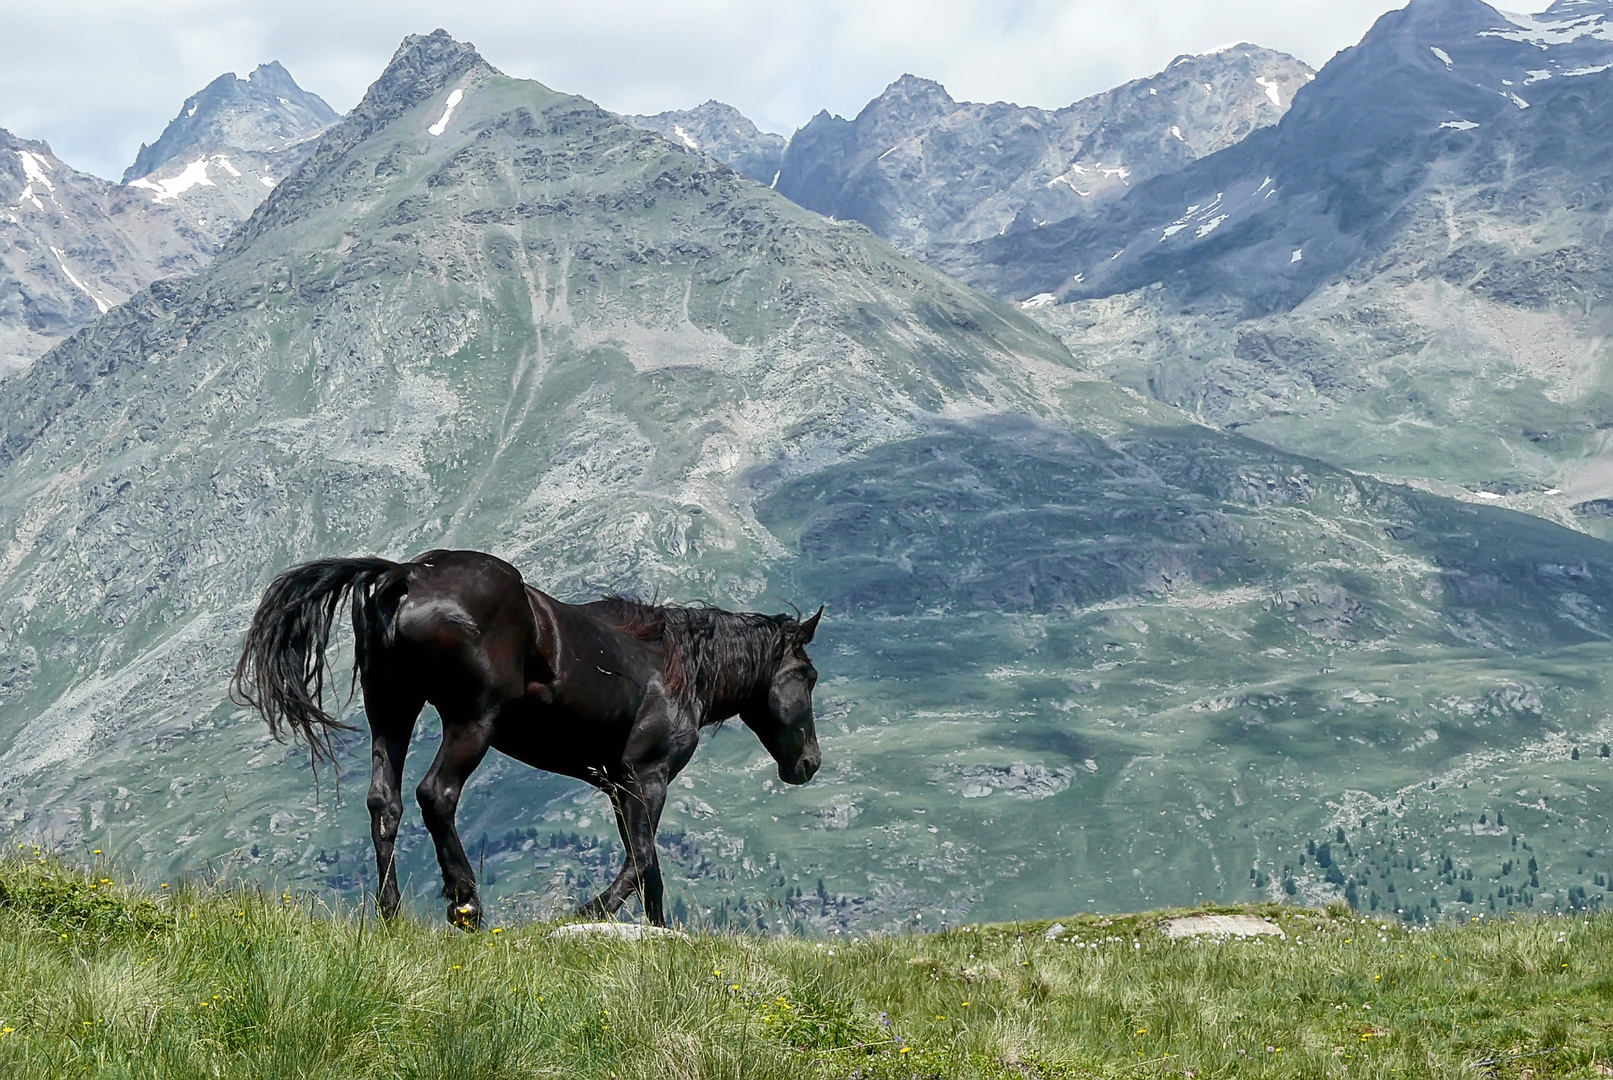 Black horse in the mountains of Austria